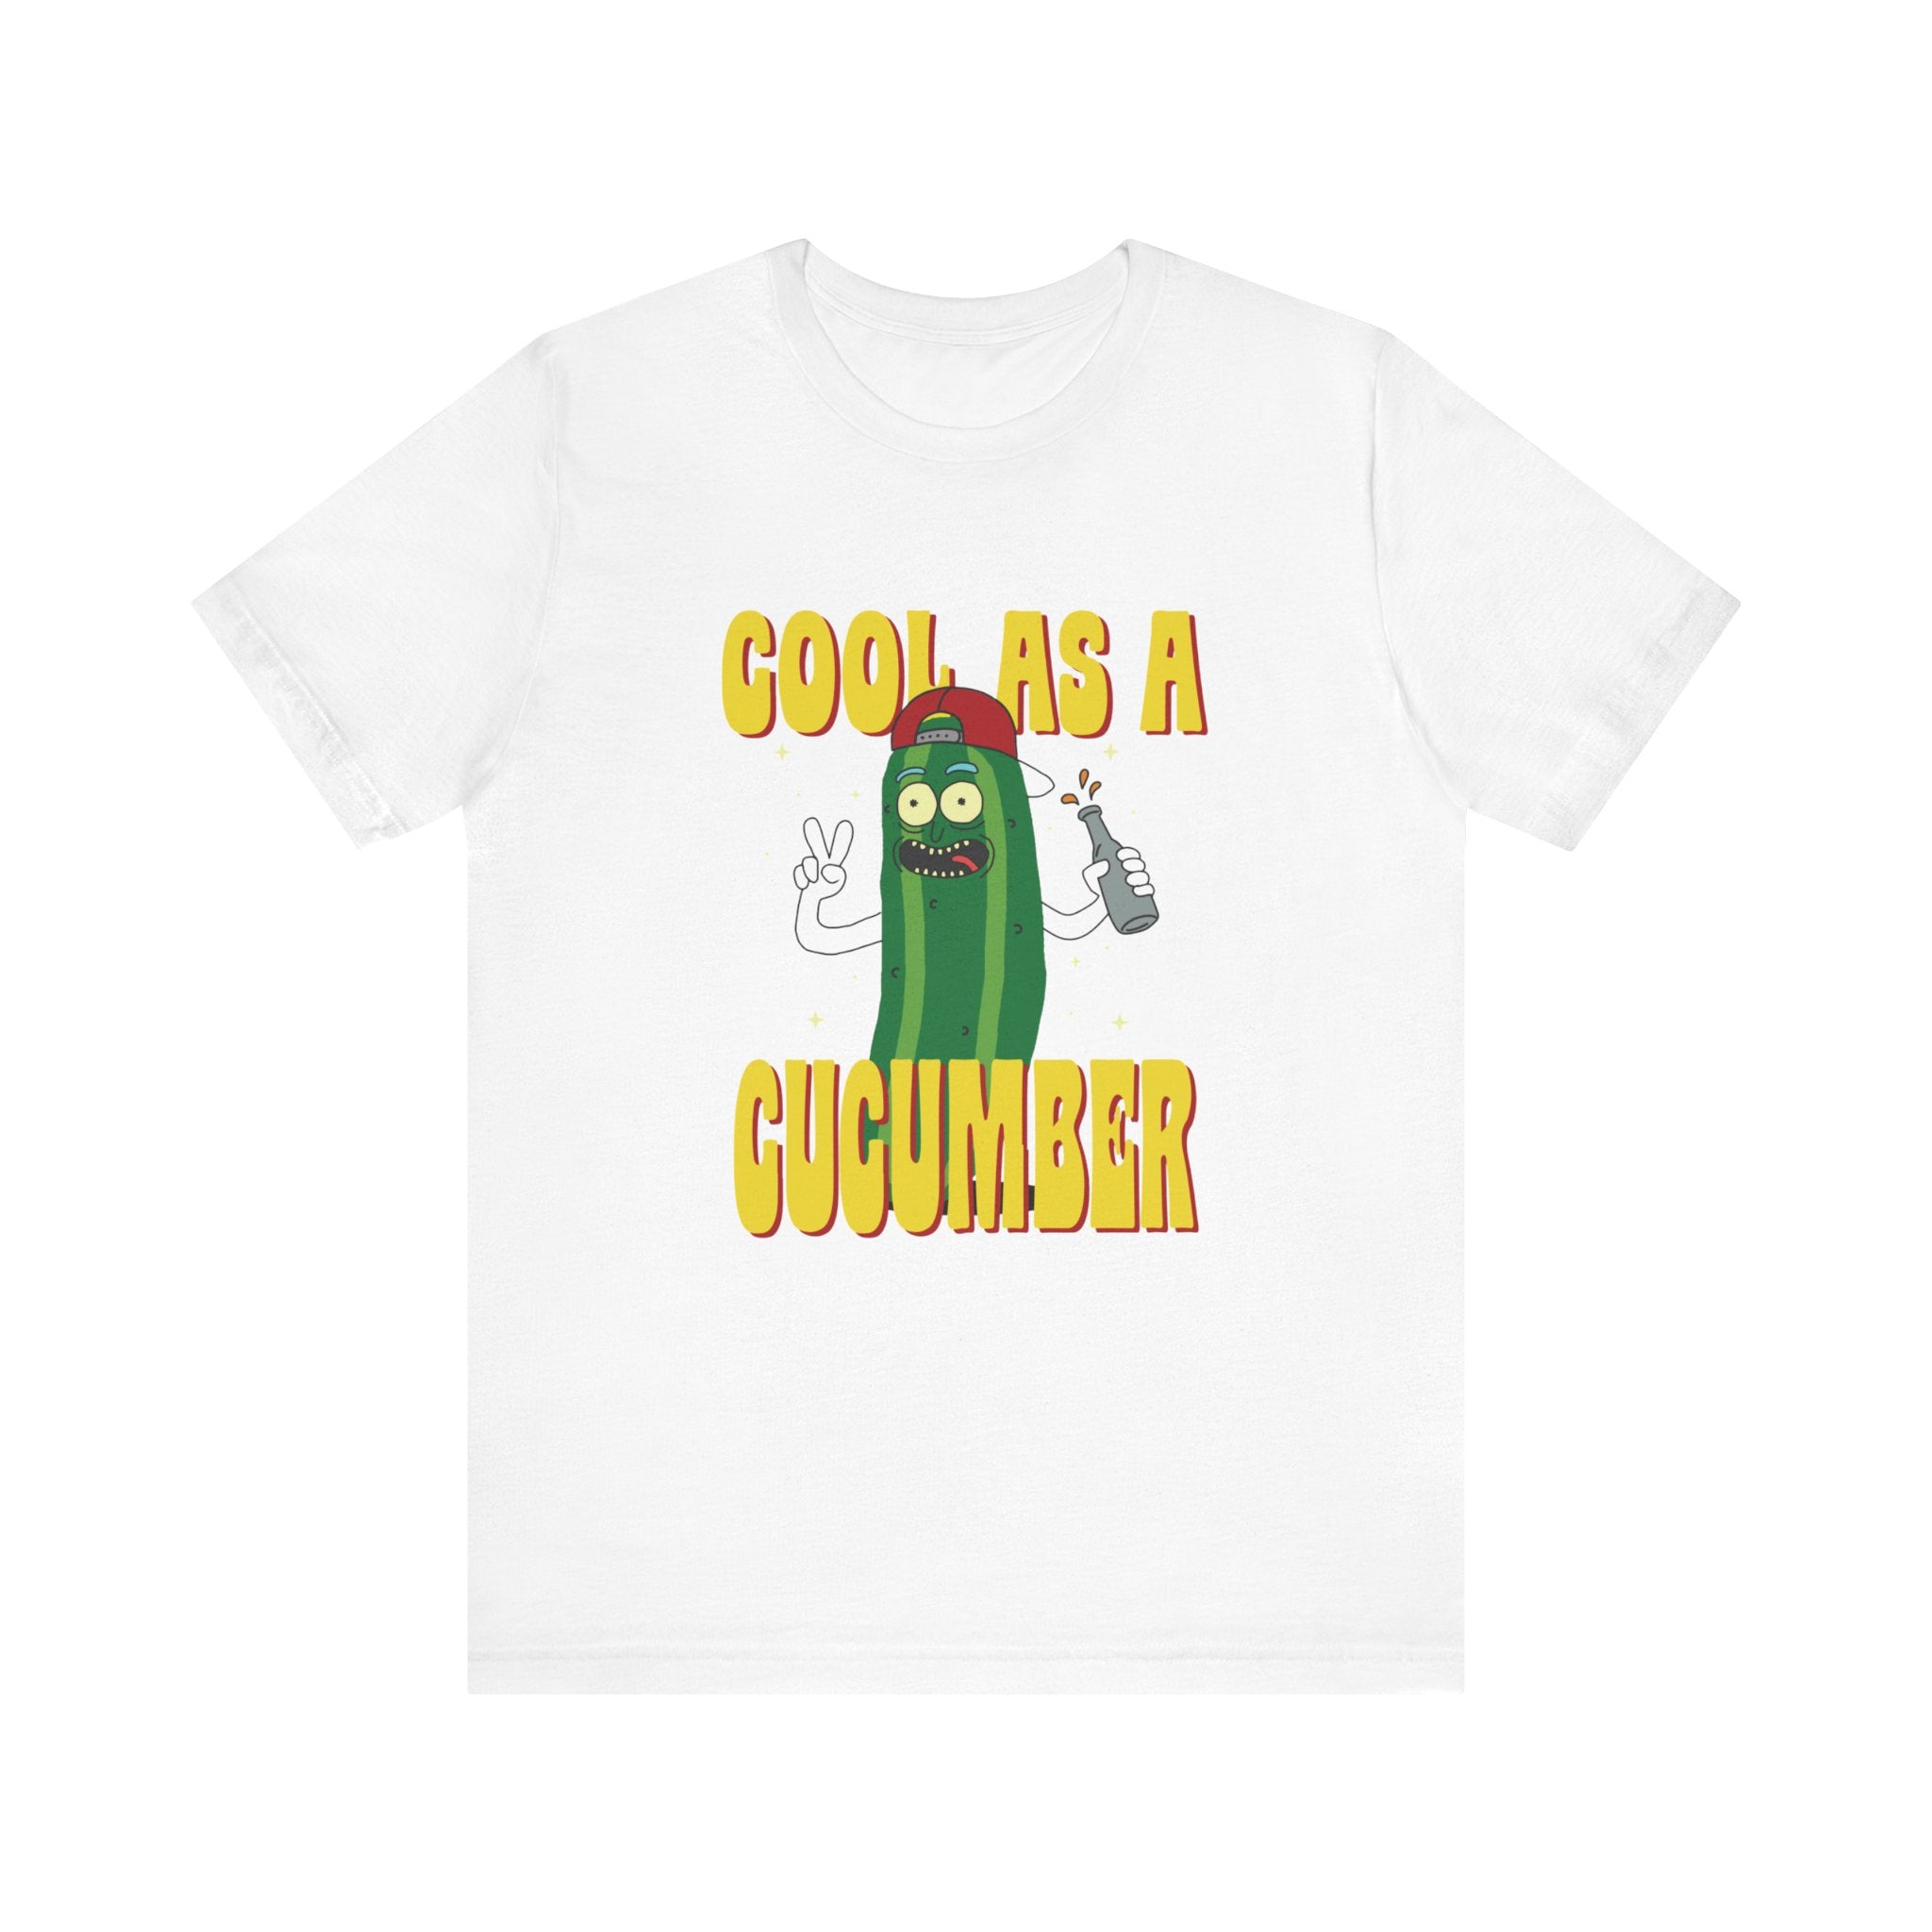 Graphic of a green Cool as a Cucumber character with sunglasses on a unisex jersey tee, holding a drink, accompanied by the text "cool as a cucumber.